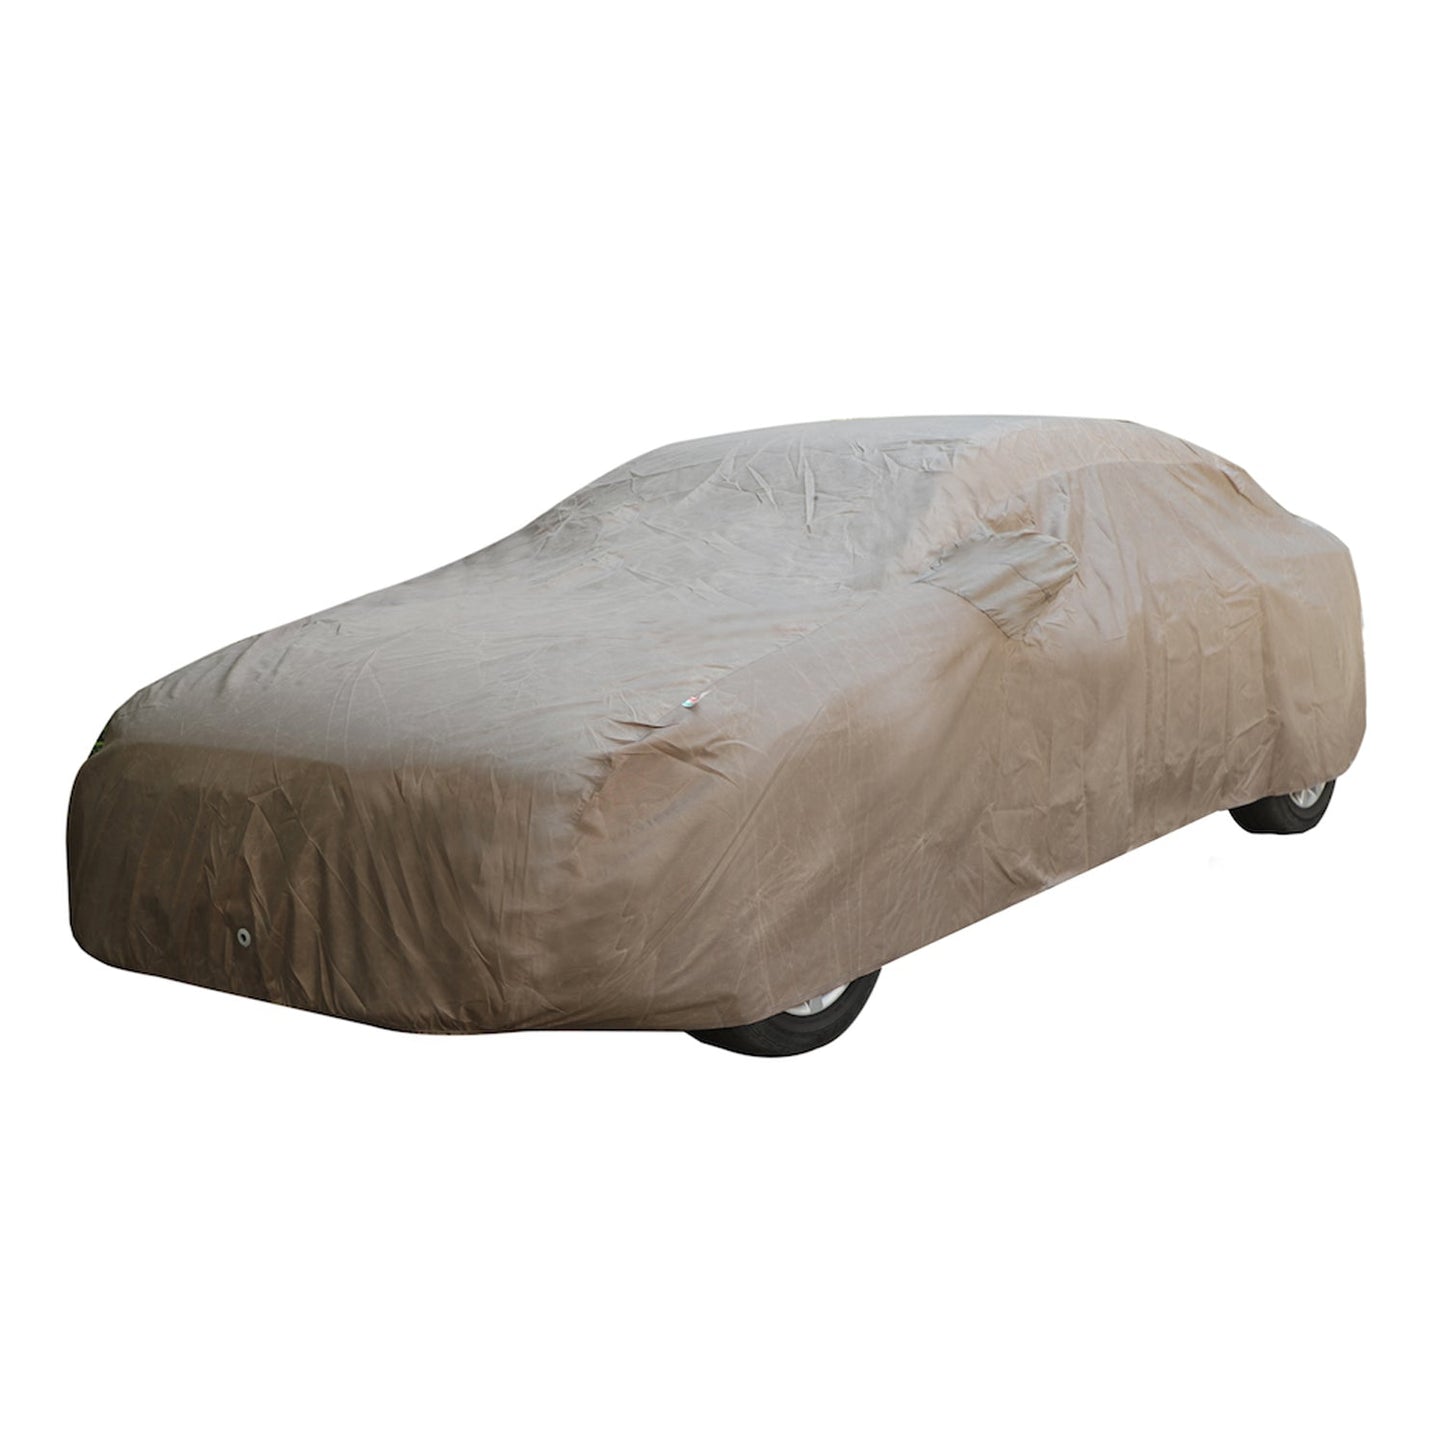 Oshotto Brown 100% Waterproof Car Body Cover with Mirror Pockets For Hyundai Alcazar